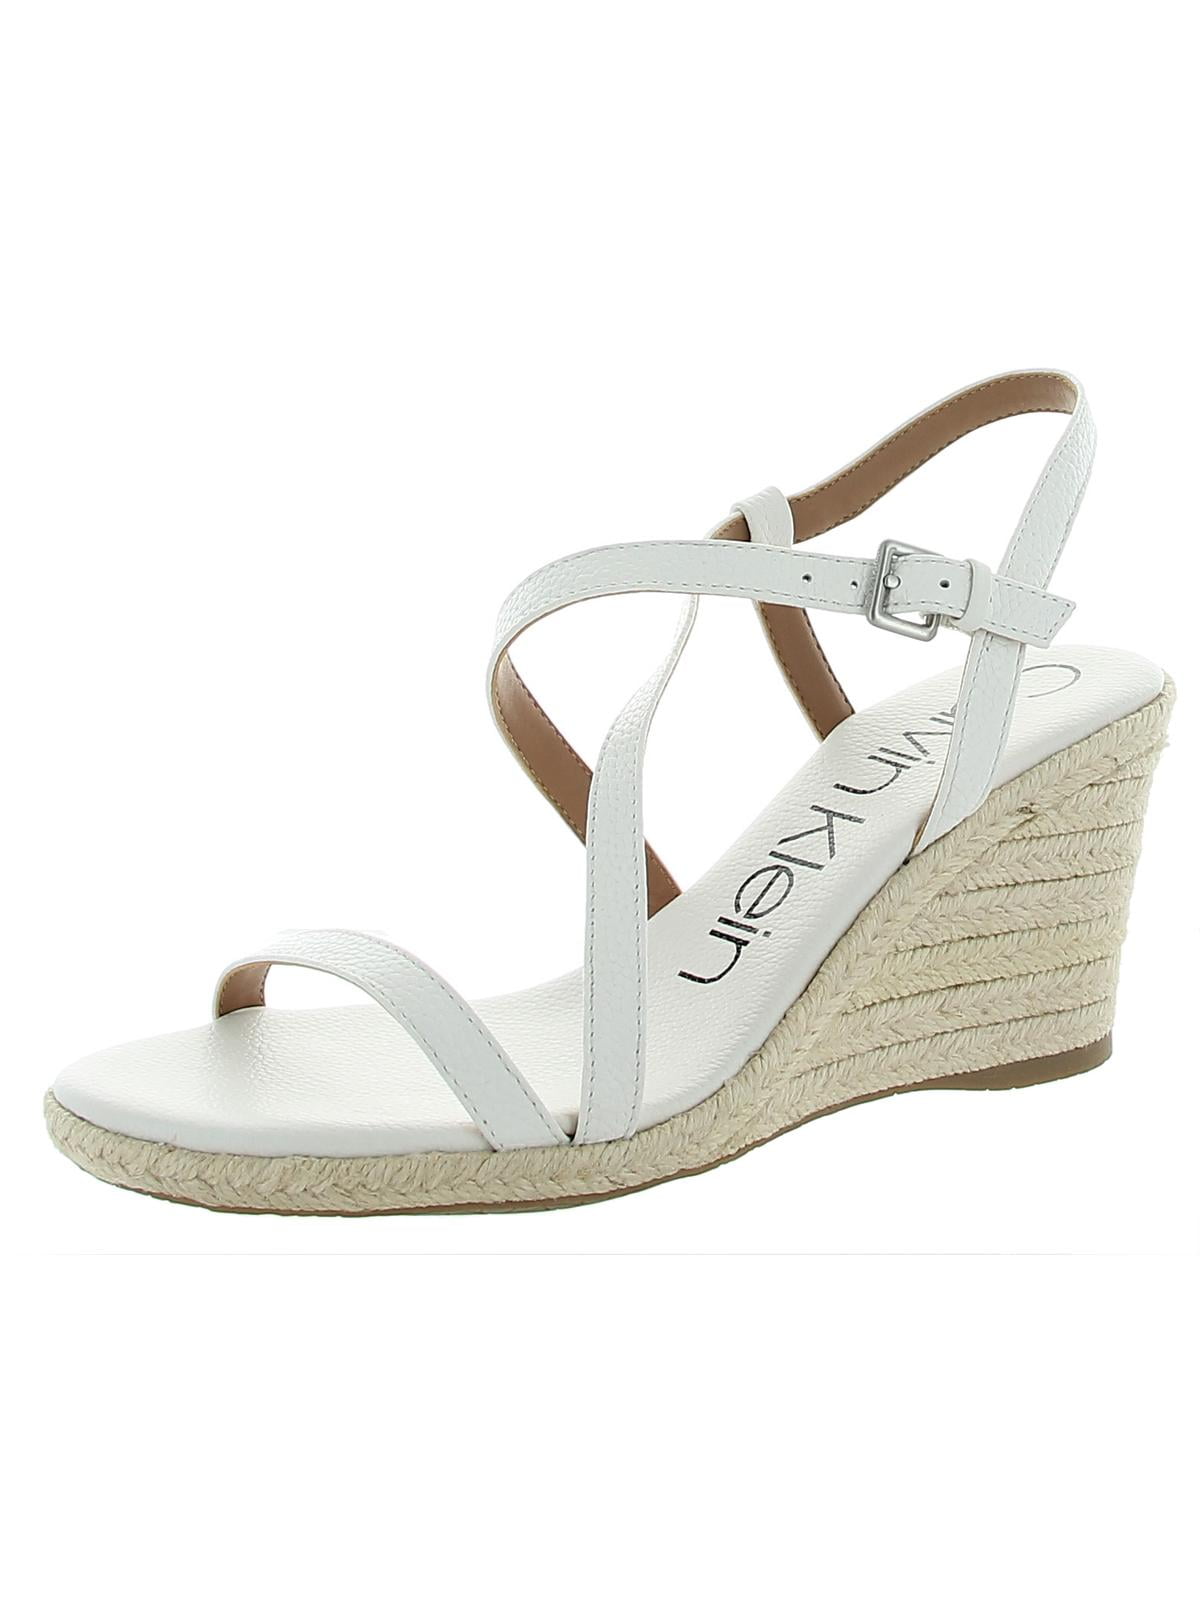 CALVIN KLEIN Womens White Woven Stretch Padded Jute Adjustable Strappy  Bellemine Round Toe Wedge Buckle Leather Espadrille Shoes  